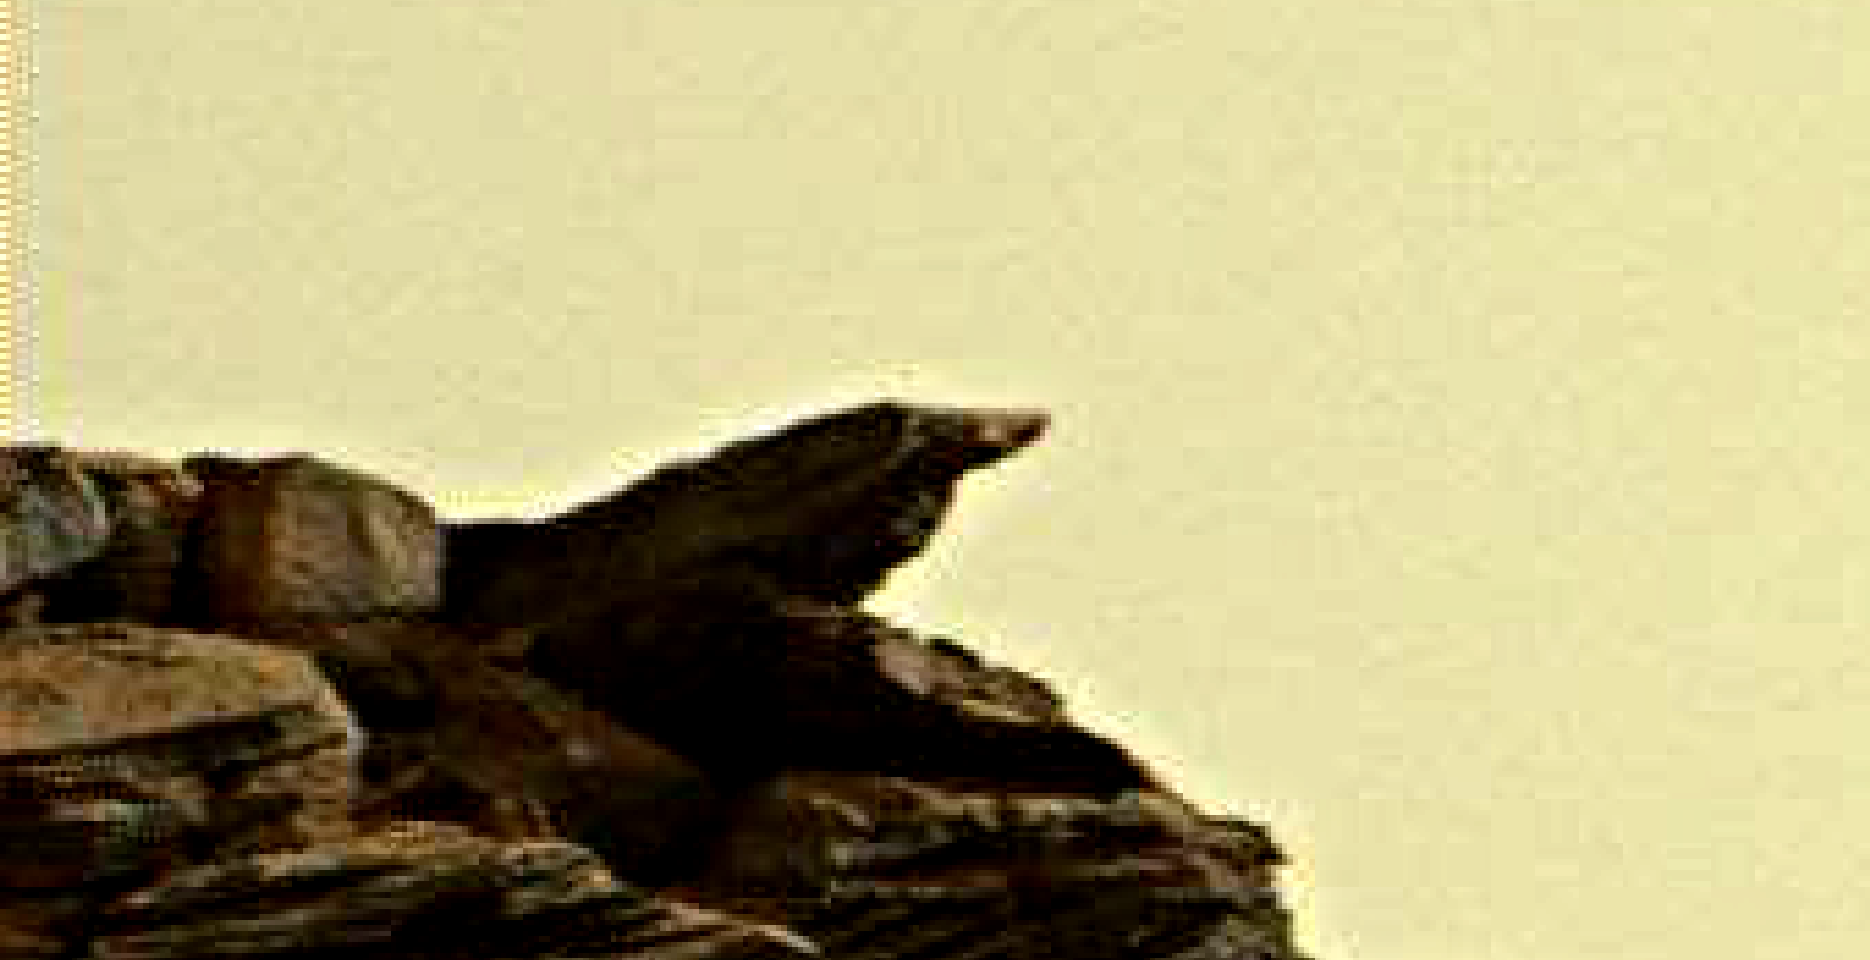 mars sol 1419 anomaly artifacts 1 was life on mars